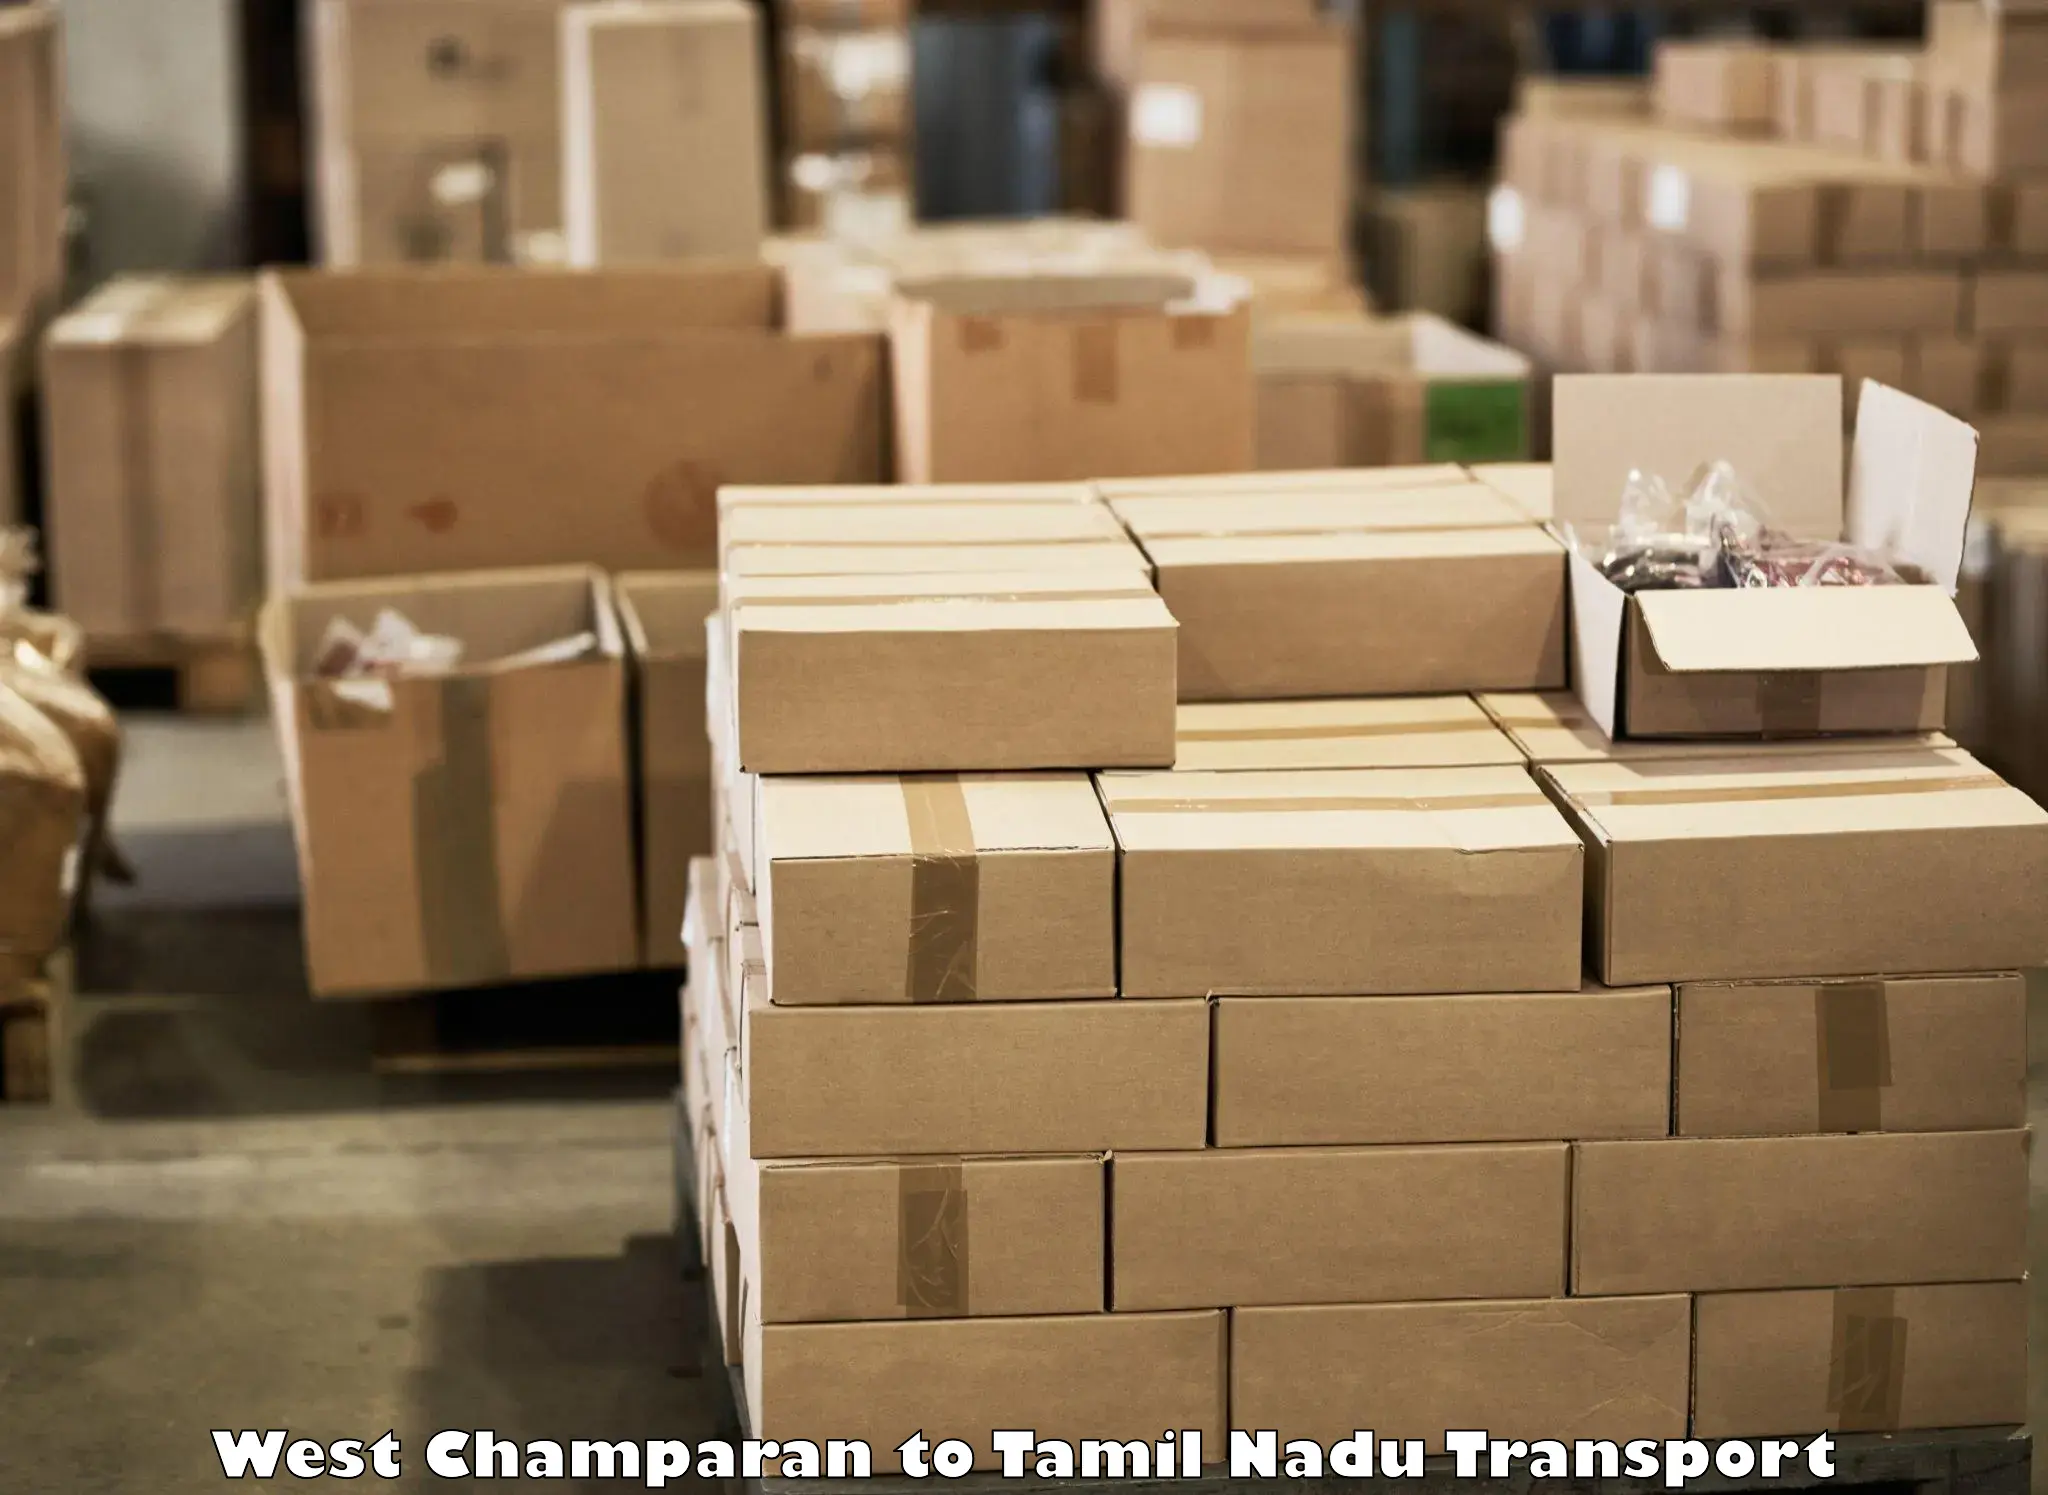 Daily parcel service transport West Champaran to Turaiyur